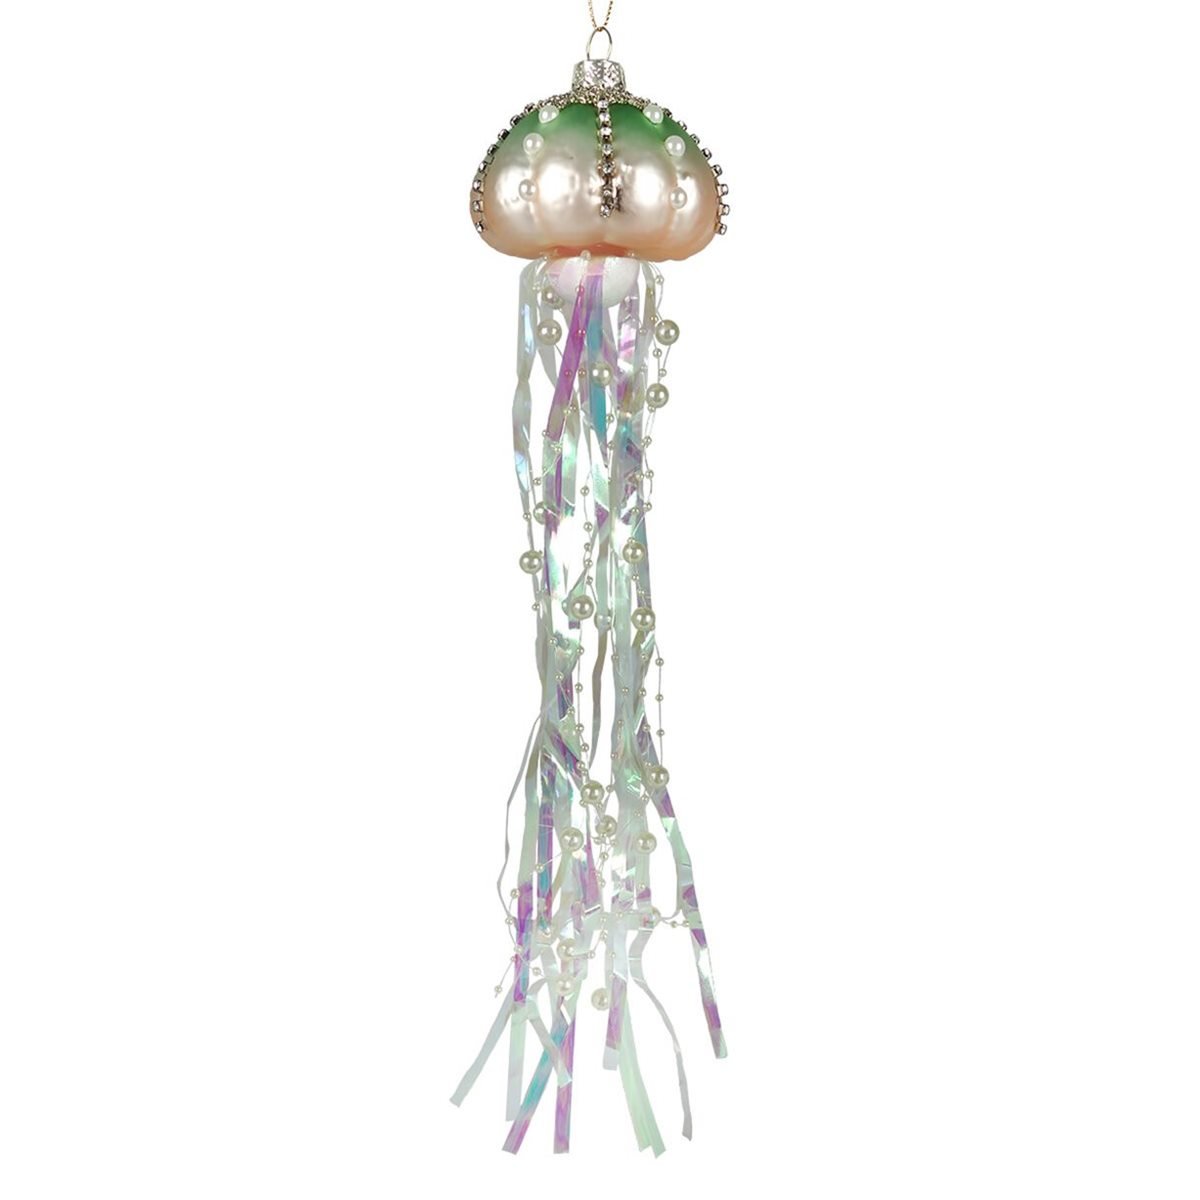 Jeweled Pink Jellyfish with Long Tentacles Ornament